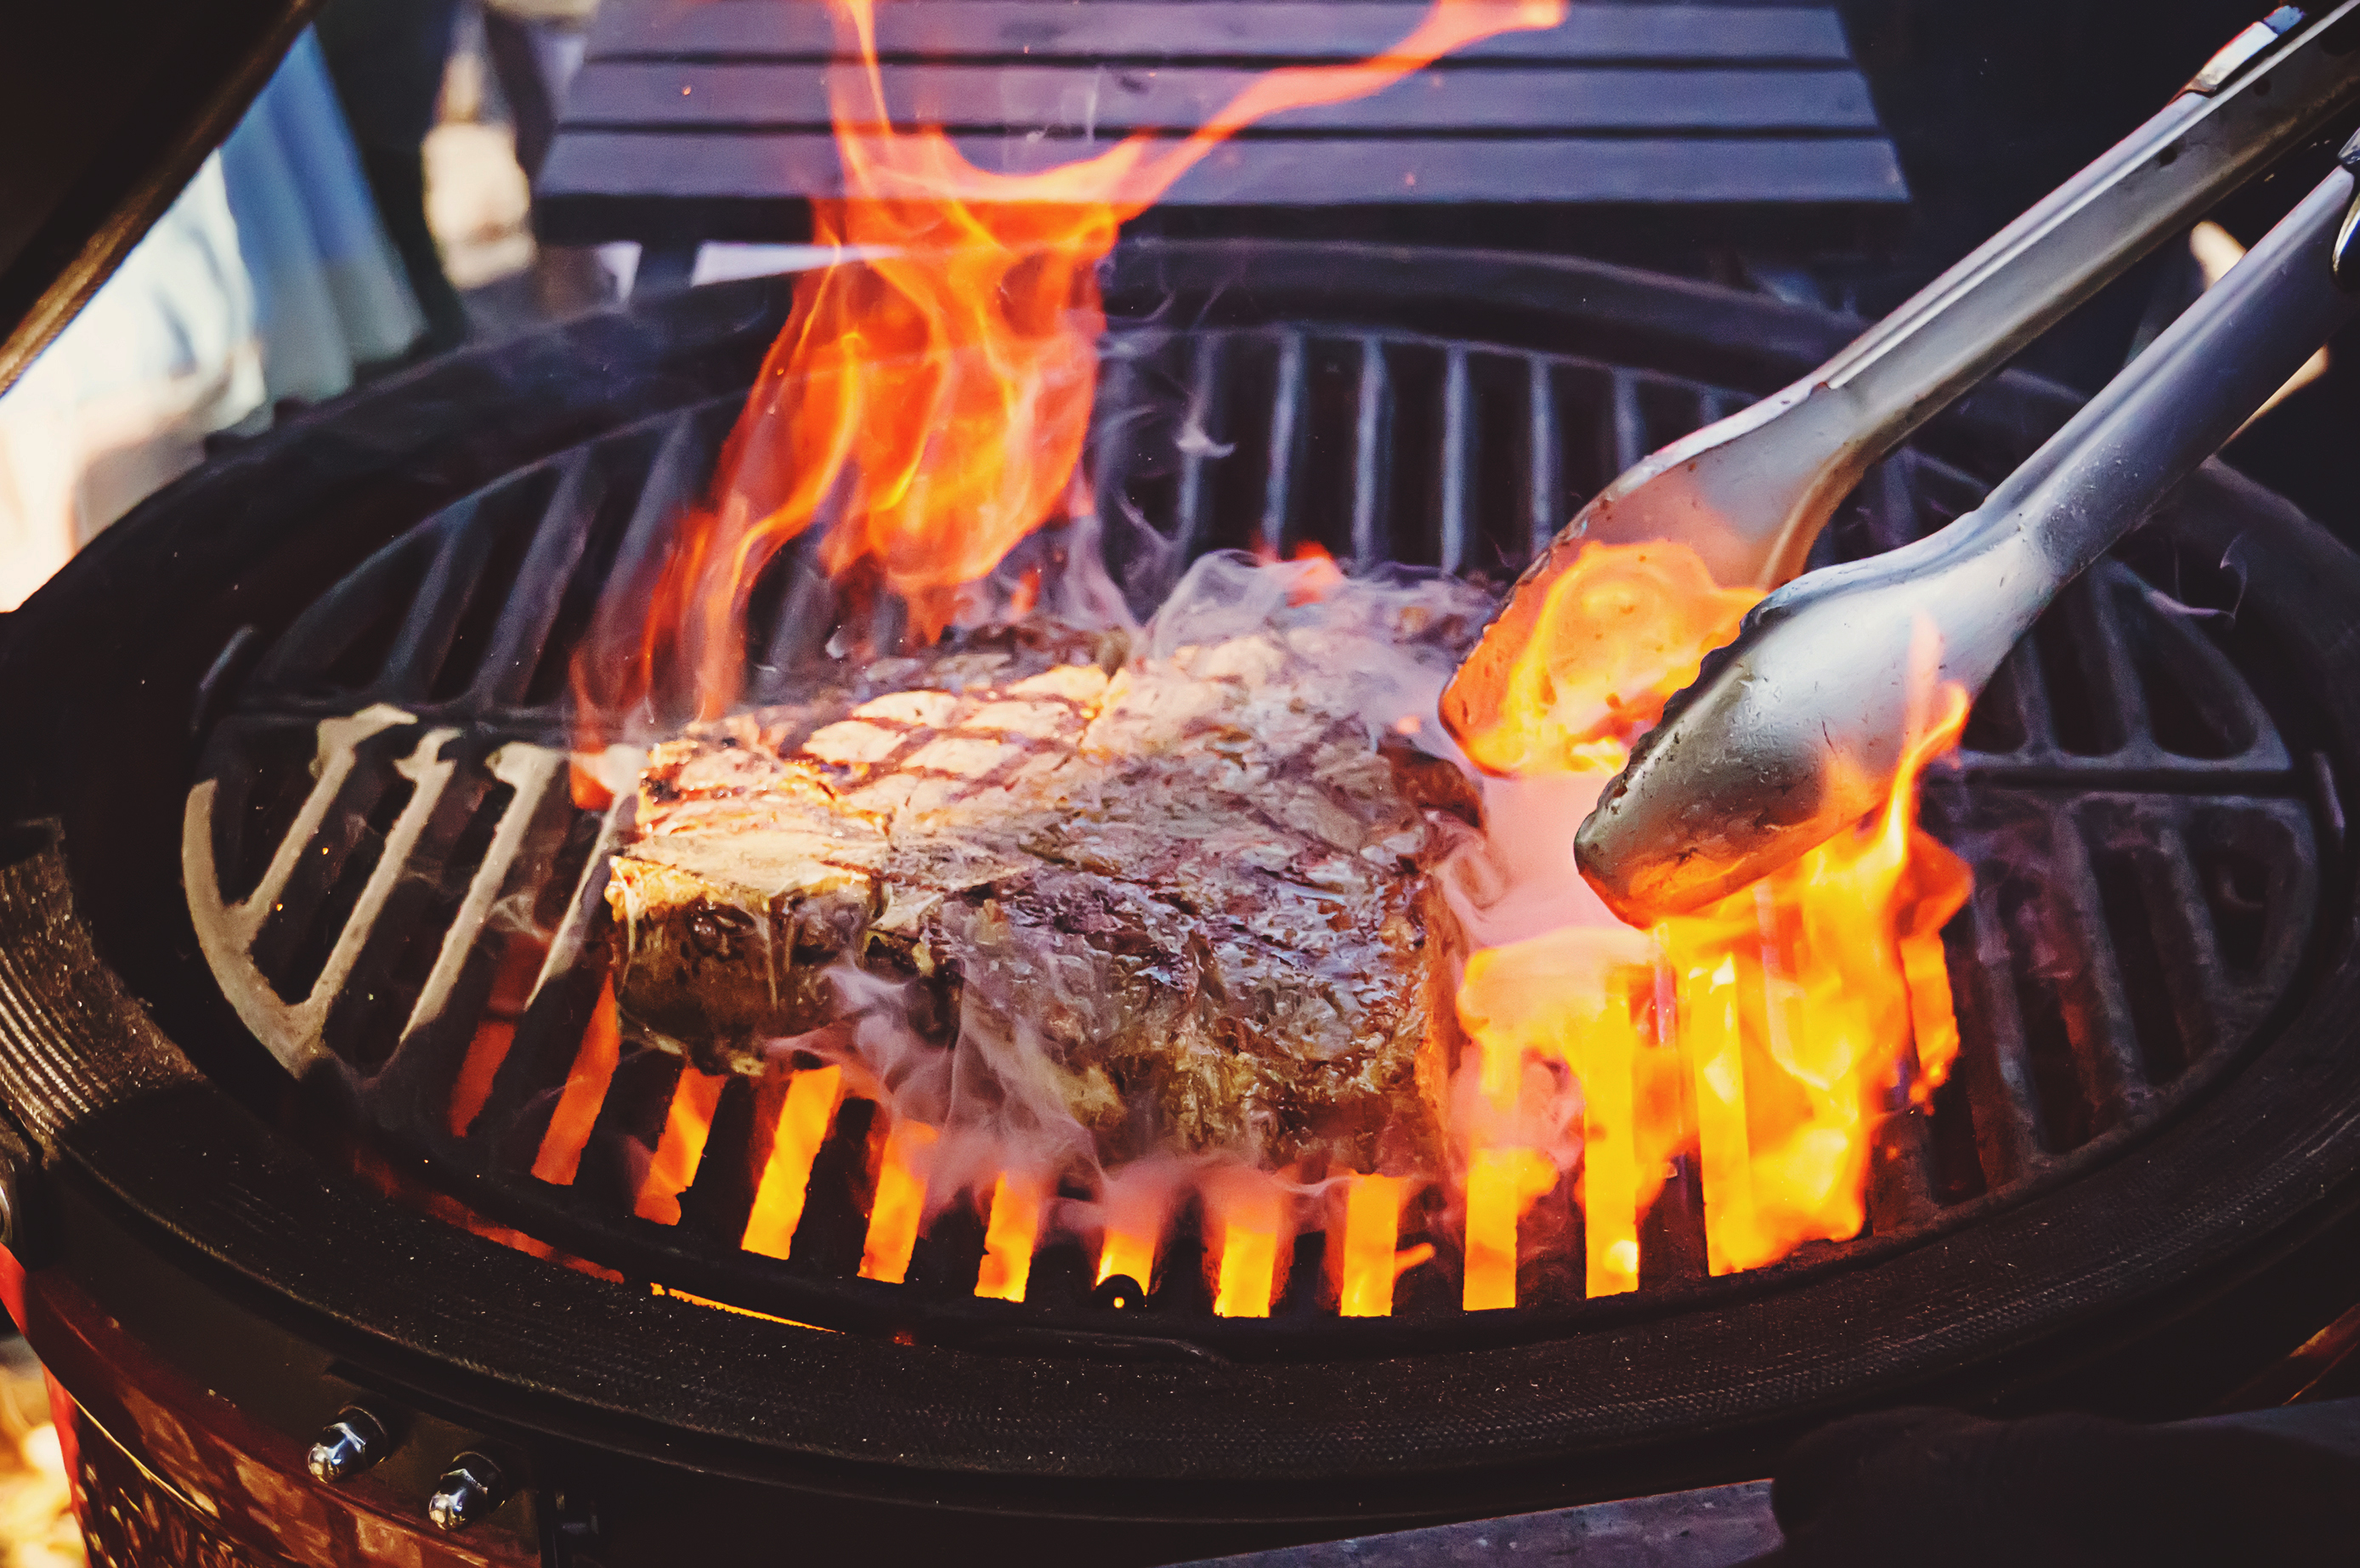 Making Healthier Meals on the Grill